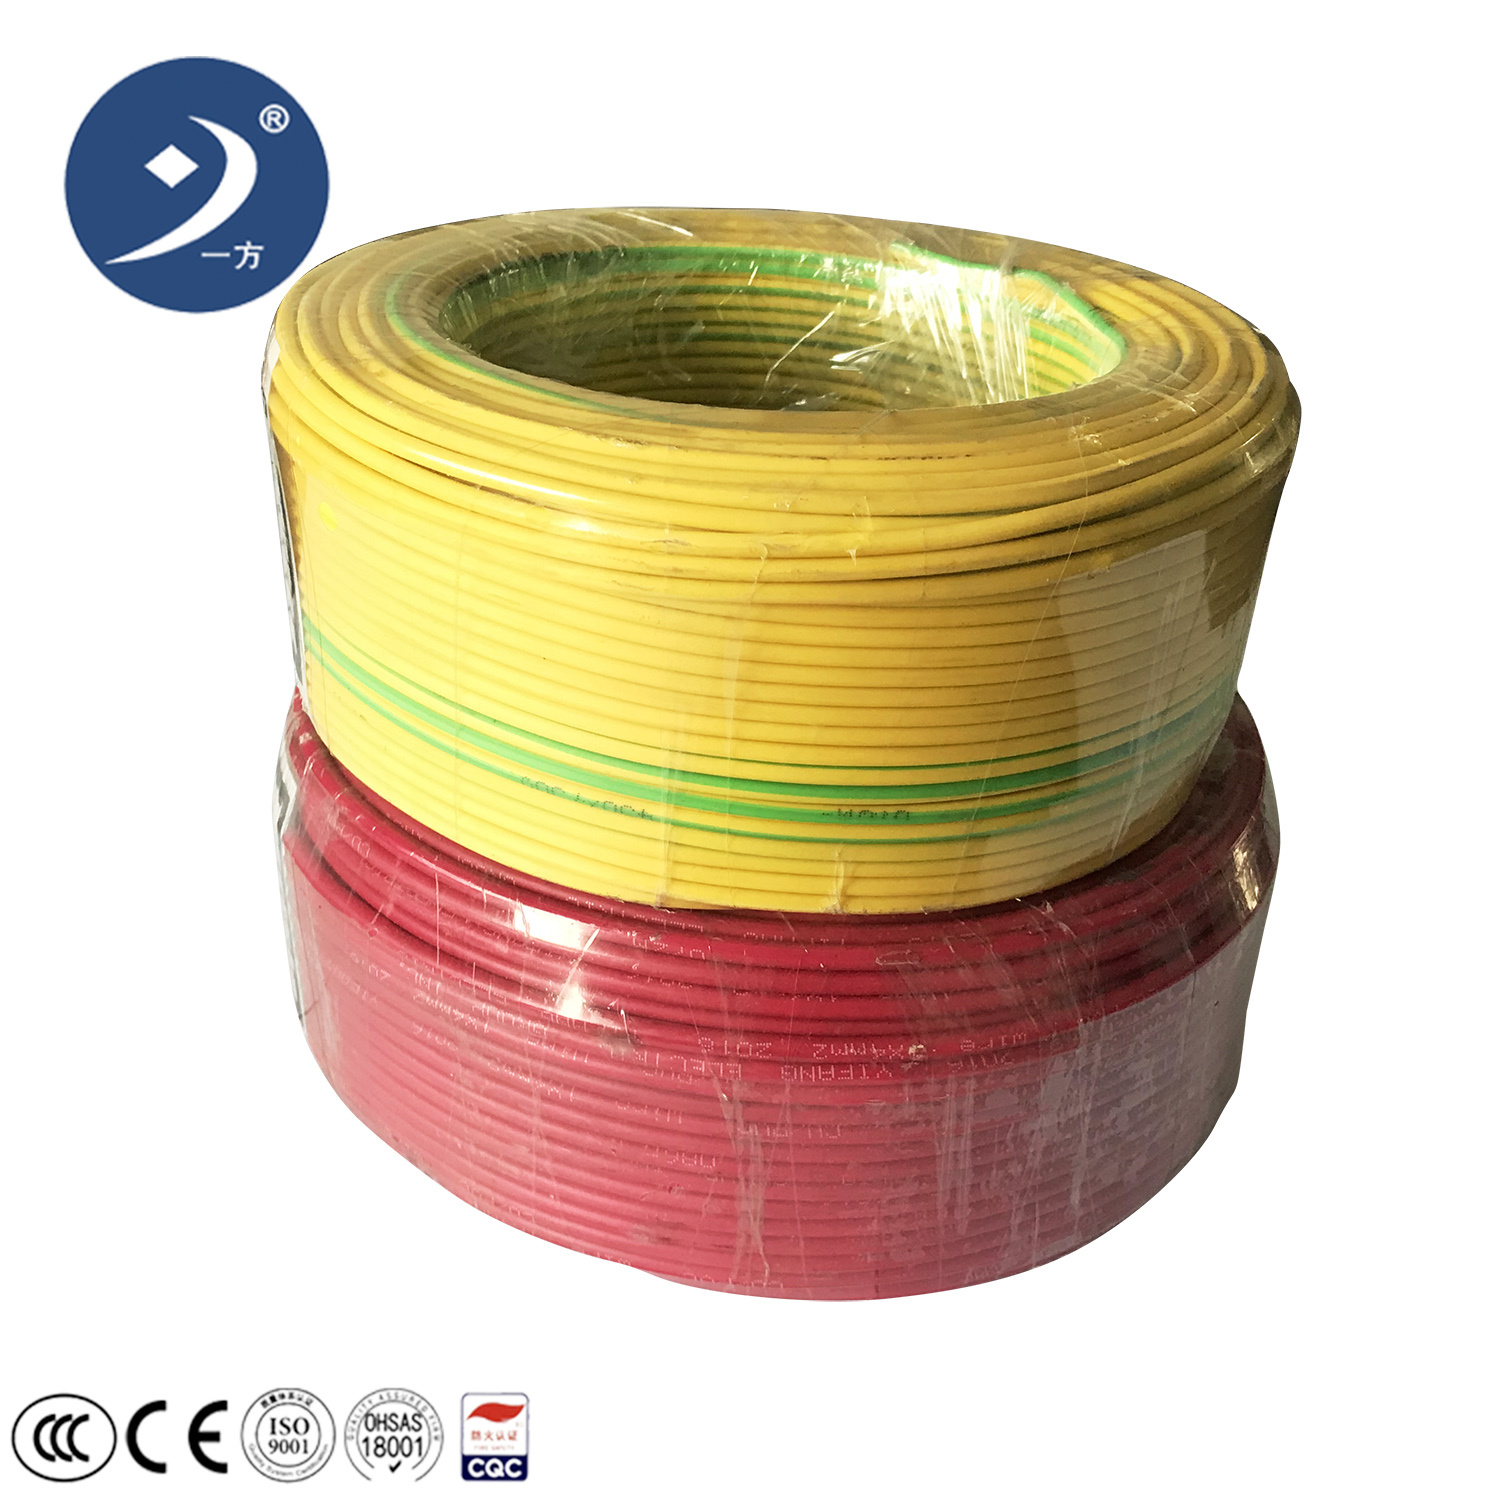 
                China Manufacturer OEM Electrical Wire PVC Copper Power Electrical Cable Wire
            